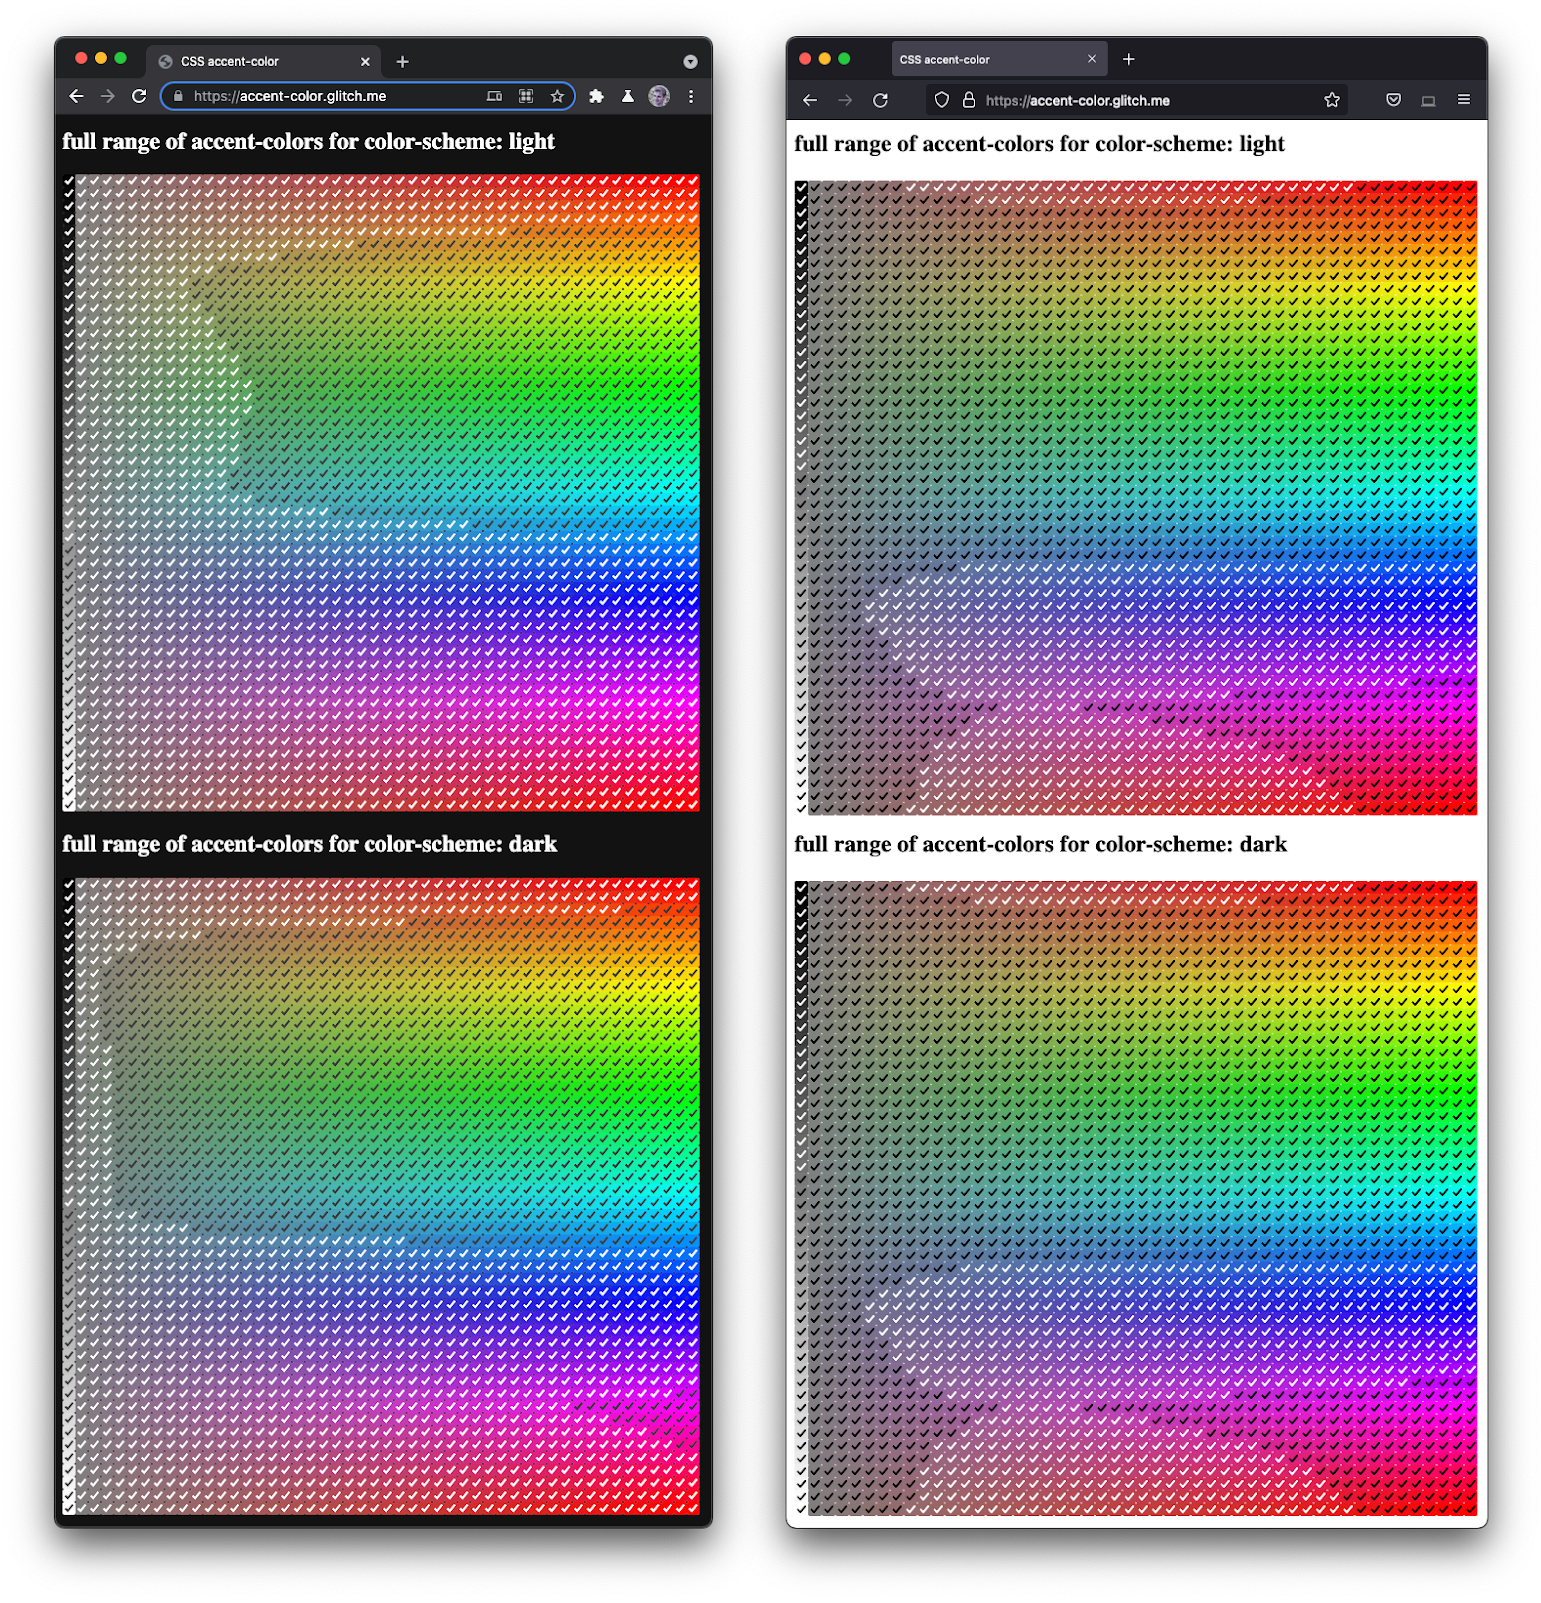 A screenshot of Firefox and Chromium side by side,
  rendering a full spectrum of checkboxes in various hues and darknesses.